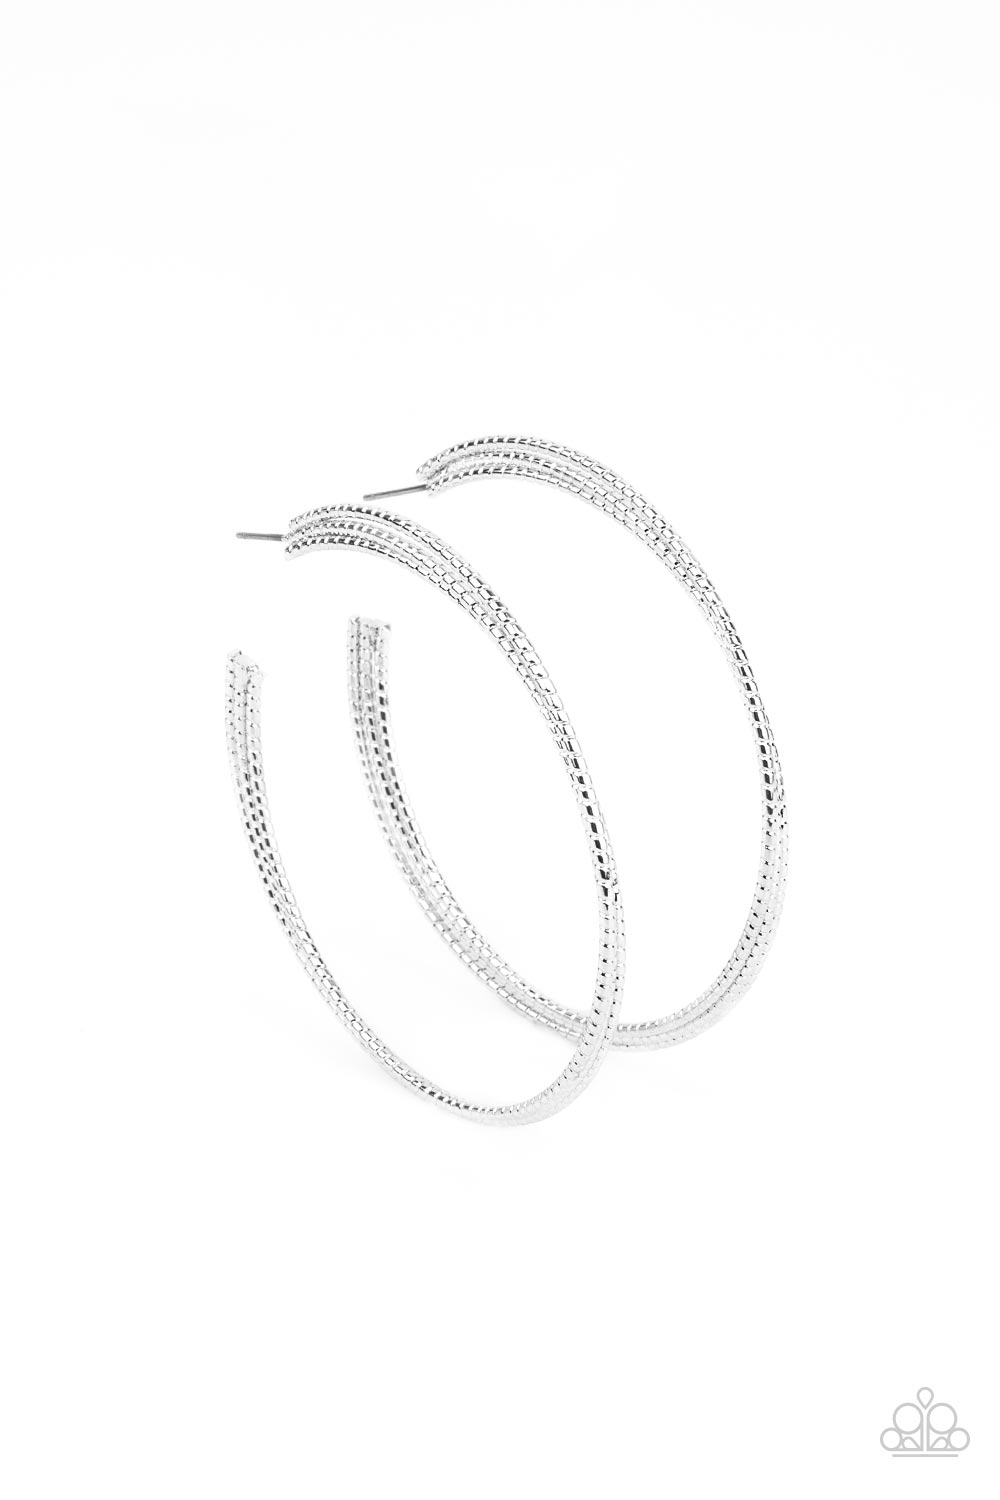 Candescent Curves - Silver Layered Hoops cut in tactile texture, three silver bars delicately stack and curve into a layered hoop for an edgy urban look. Earring attaches to a standard post fitting. Hoop measures approximately 2 1/2" in diameter.  Sold as one pair of hoop earrings.